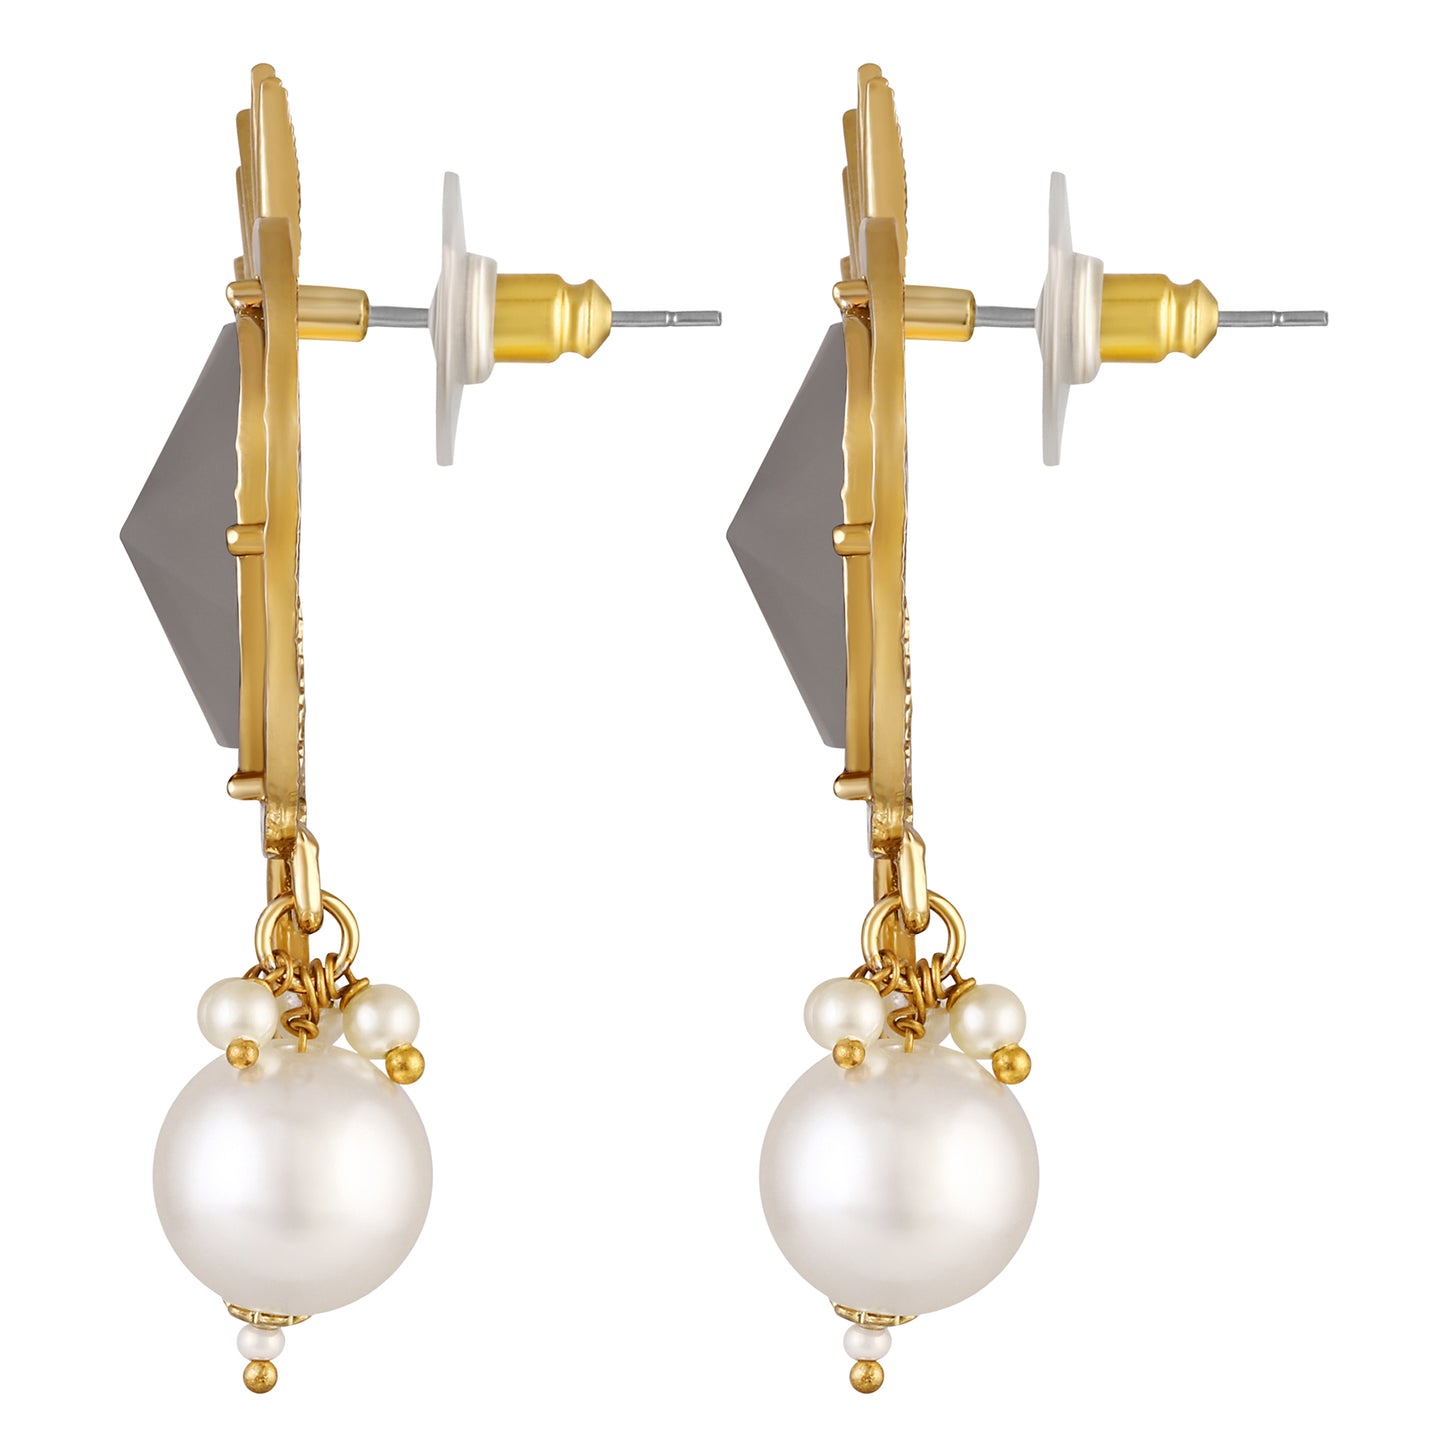 Bdiva 18K Gold Plated Grey Quarts Earrings With A Pearl Drop.